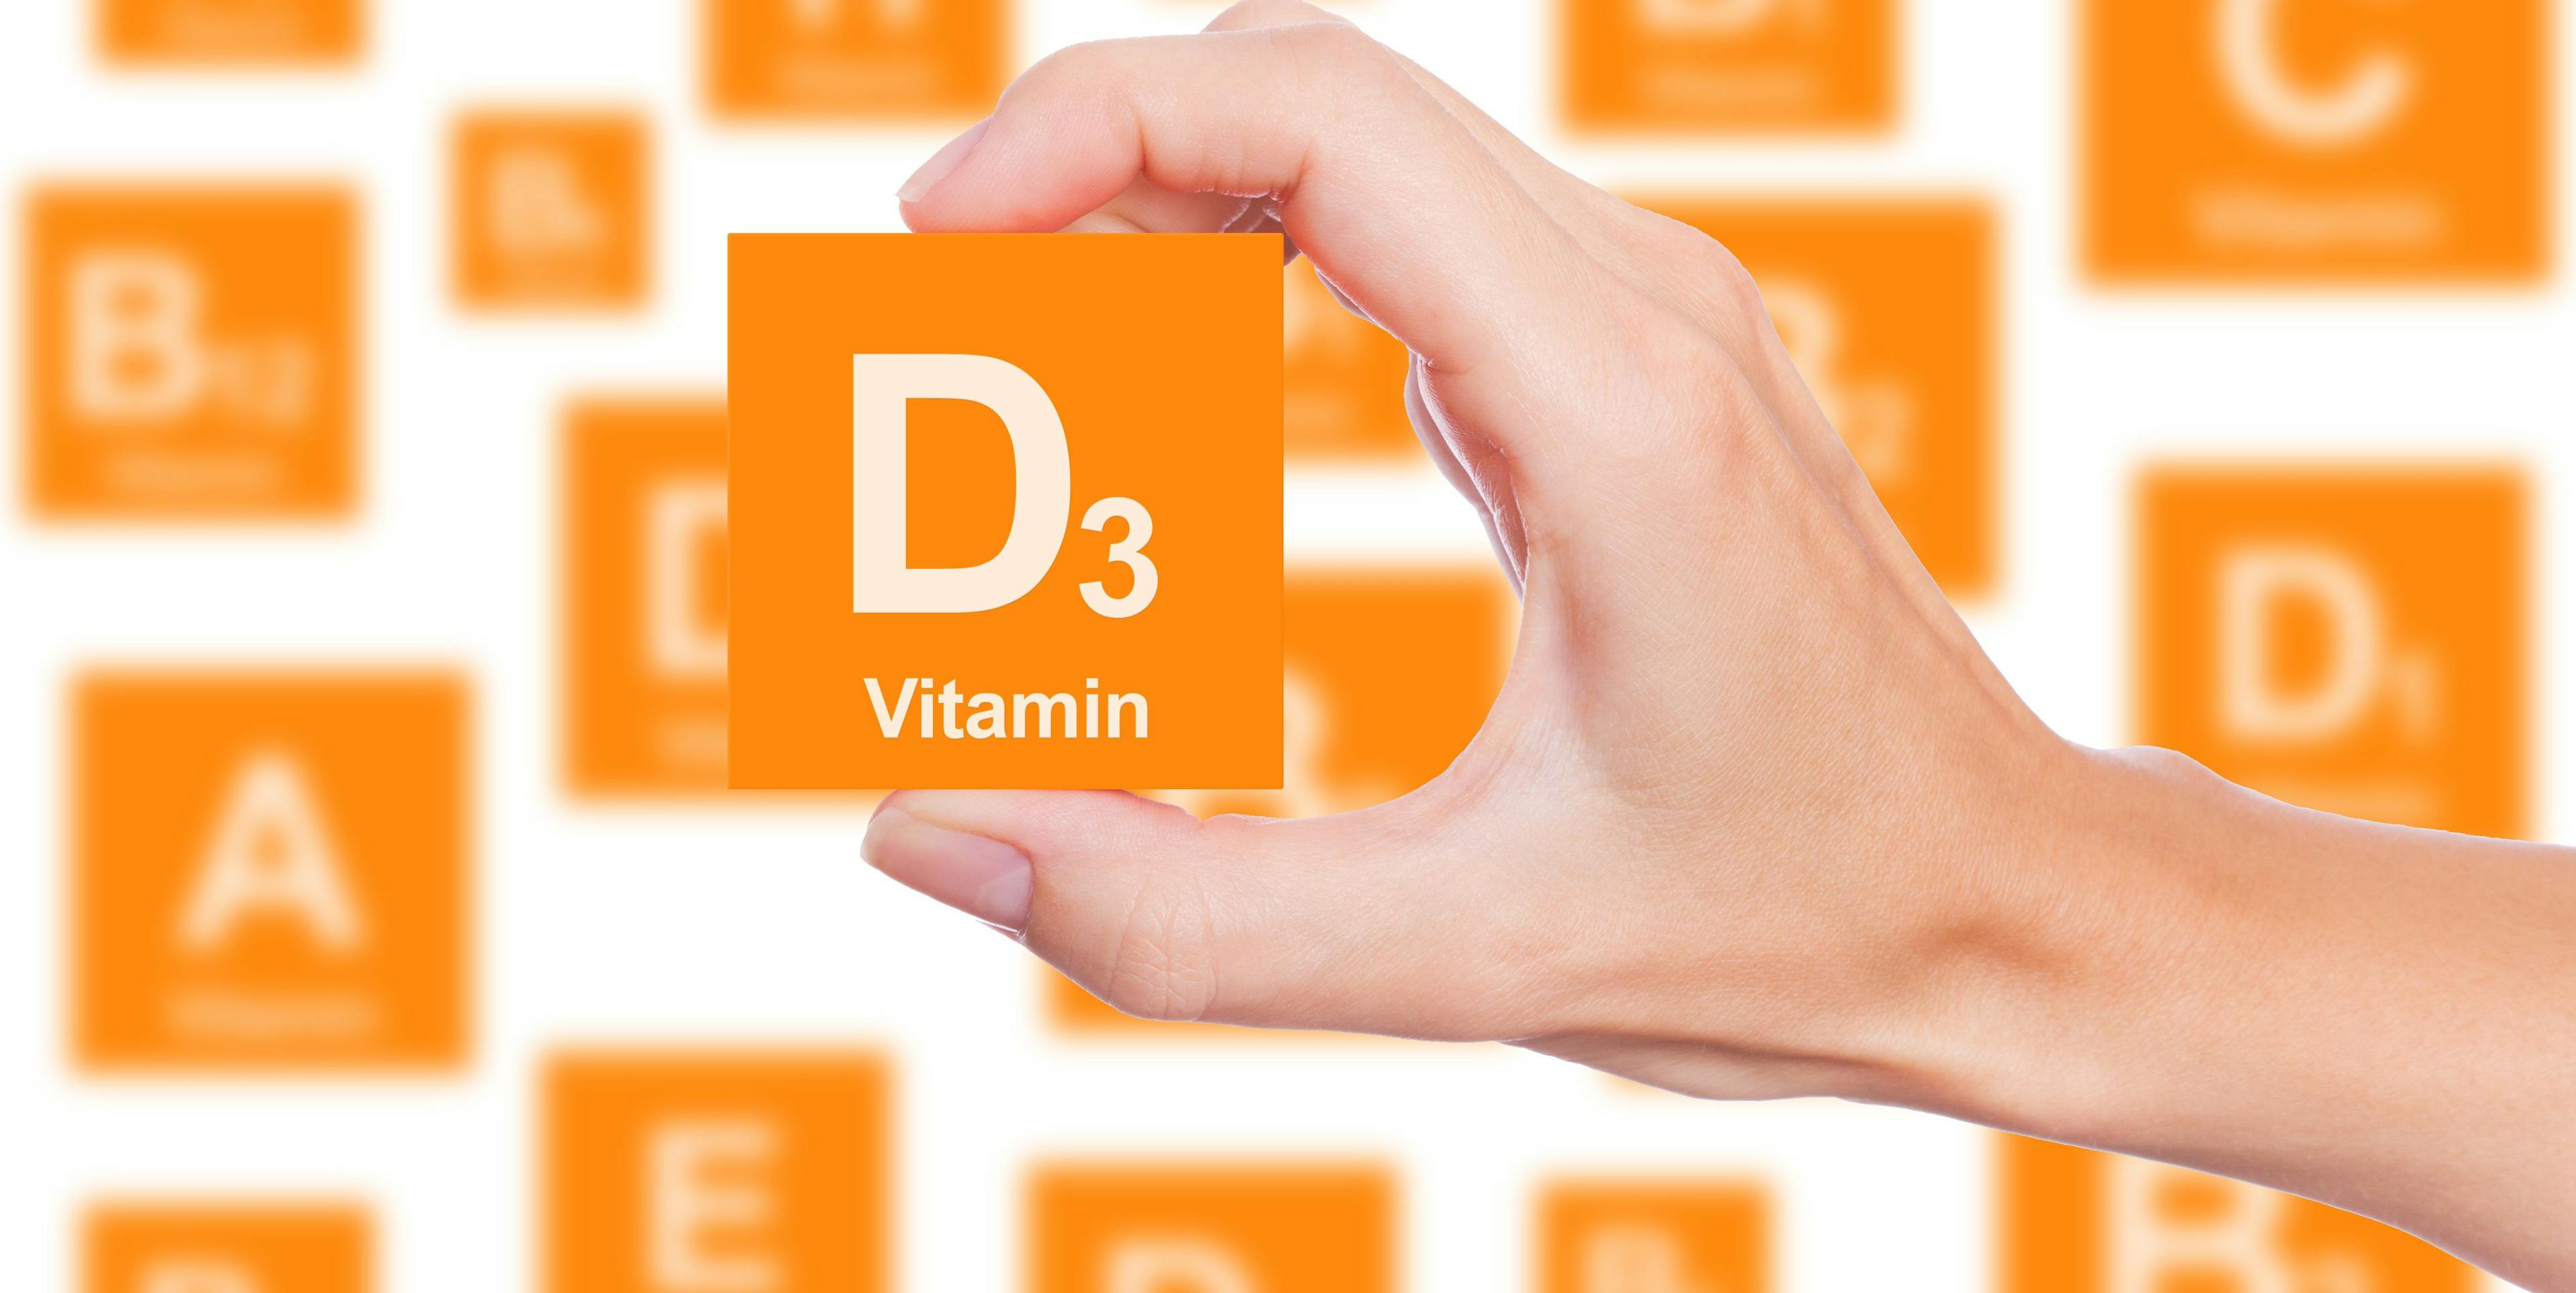 Vitamin D Deficiency Closely Linked to Non-Alcoholic Fatty Liver Disease